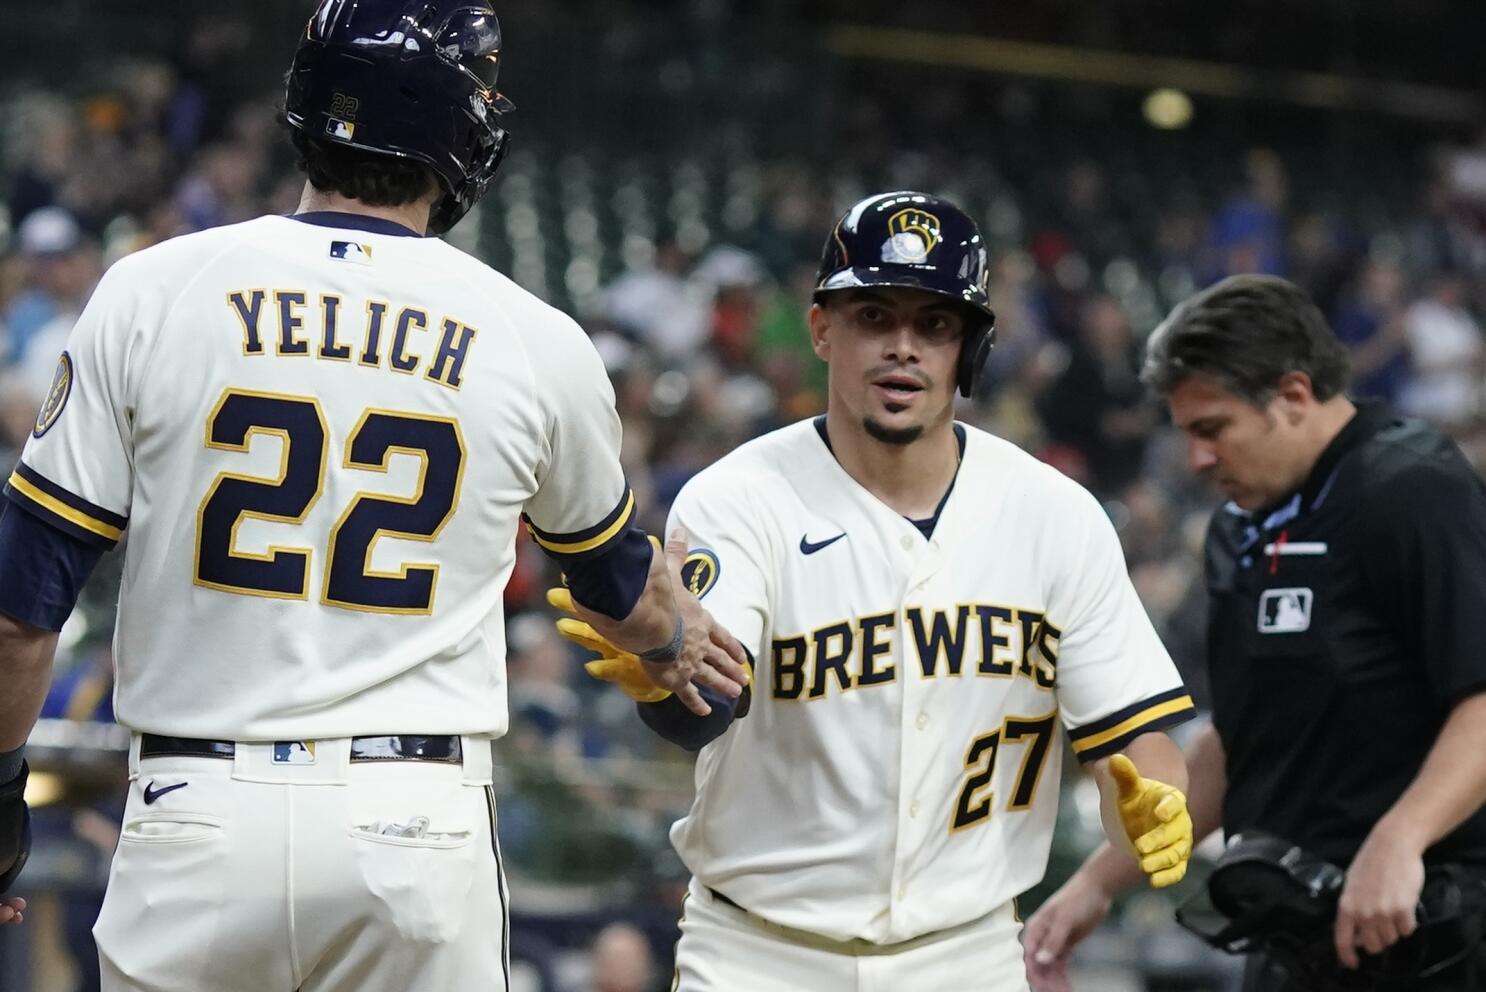 Milwaukee's Willy Adames out of hospital, on concussion list after